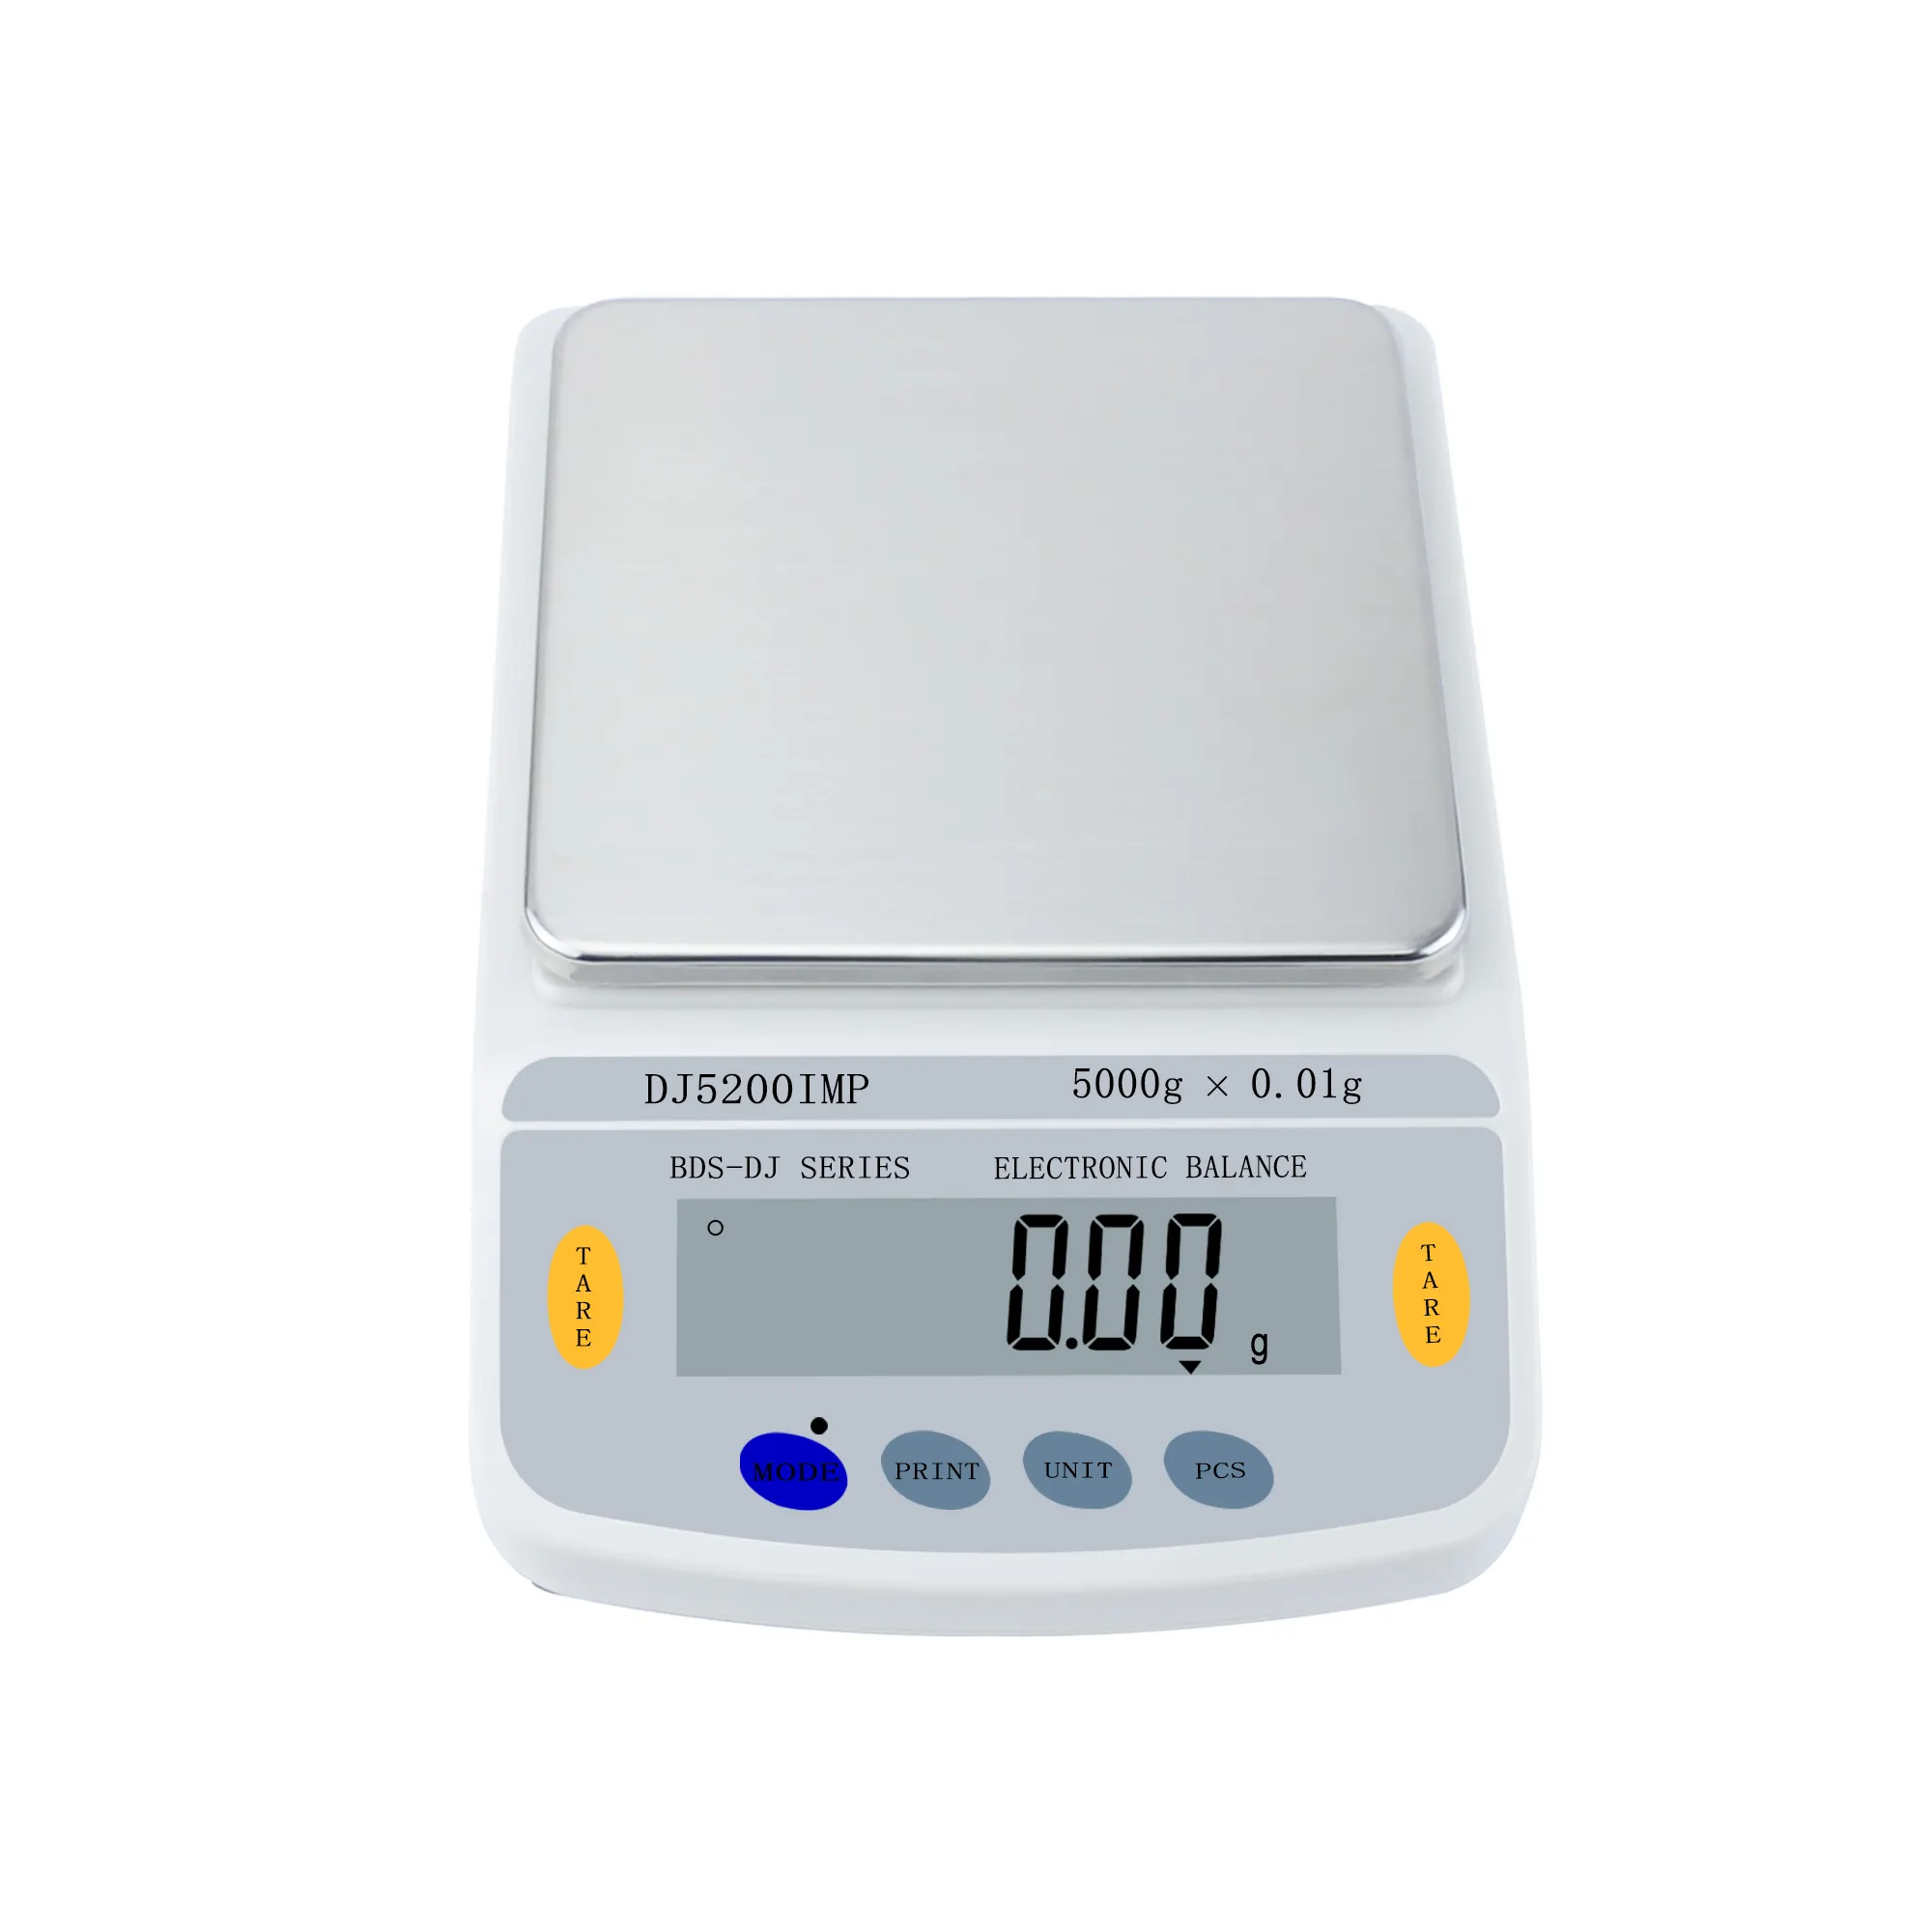 BDS-DJ 3kg electronic digital balance LCD display colour coded keys laboratory analytical tools & equipment